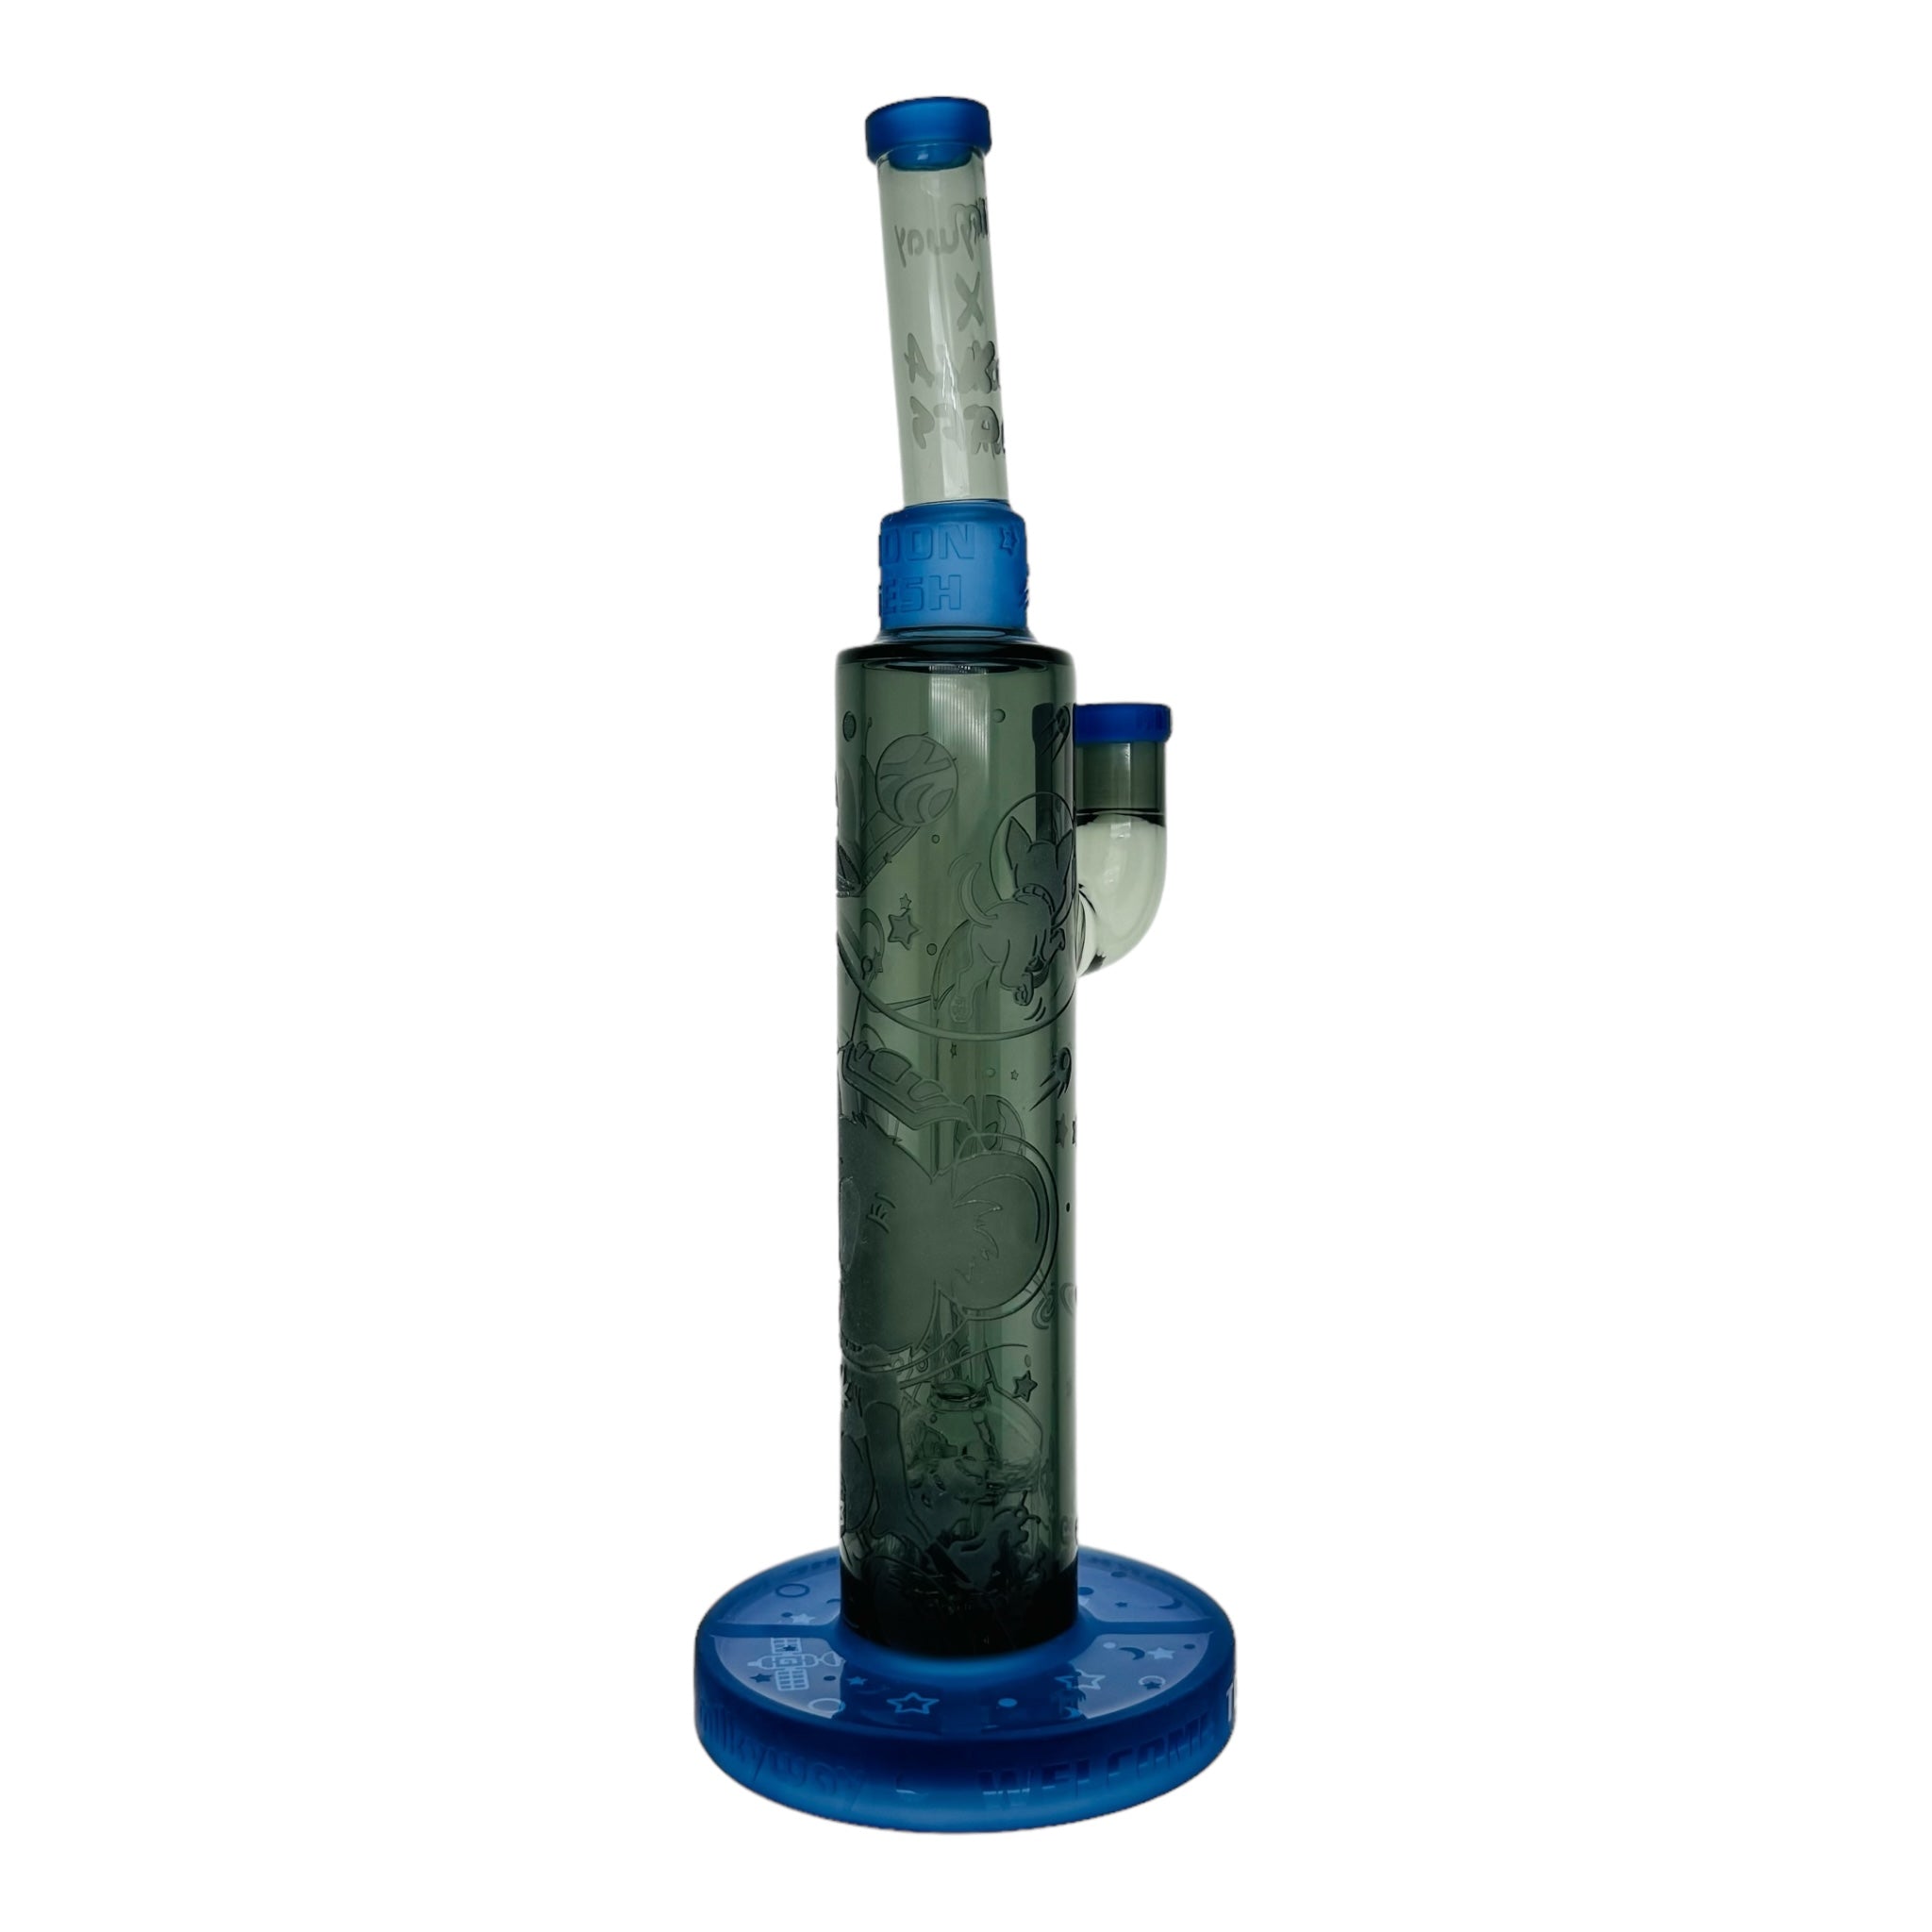 Milkyway Glass and Koala Puffs Moon Sesh 12” Dab Rig Or Bong for cannabis Black And Blue